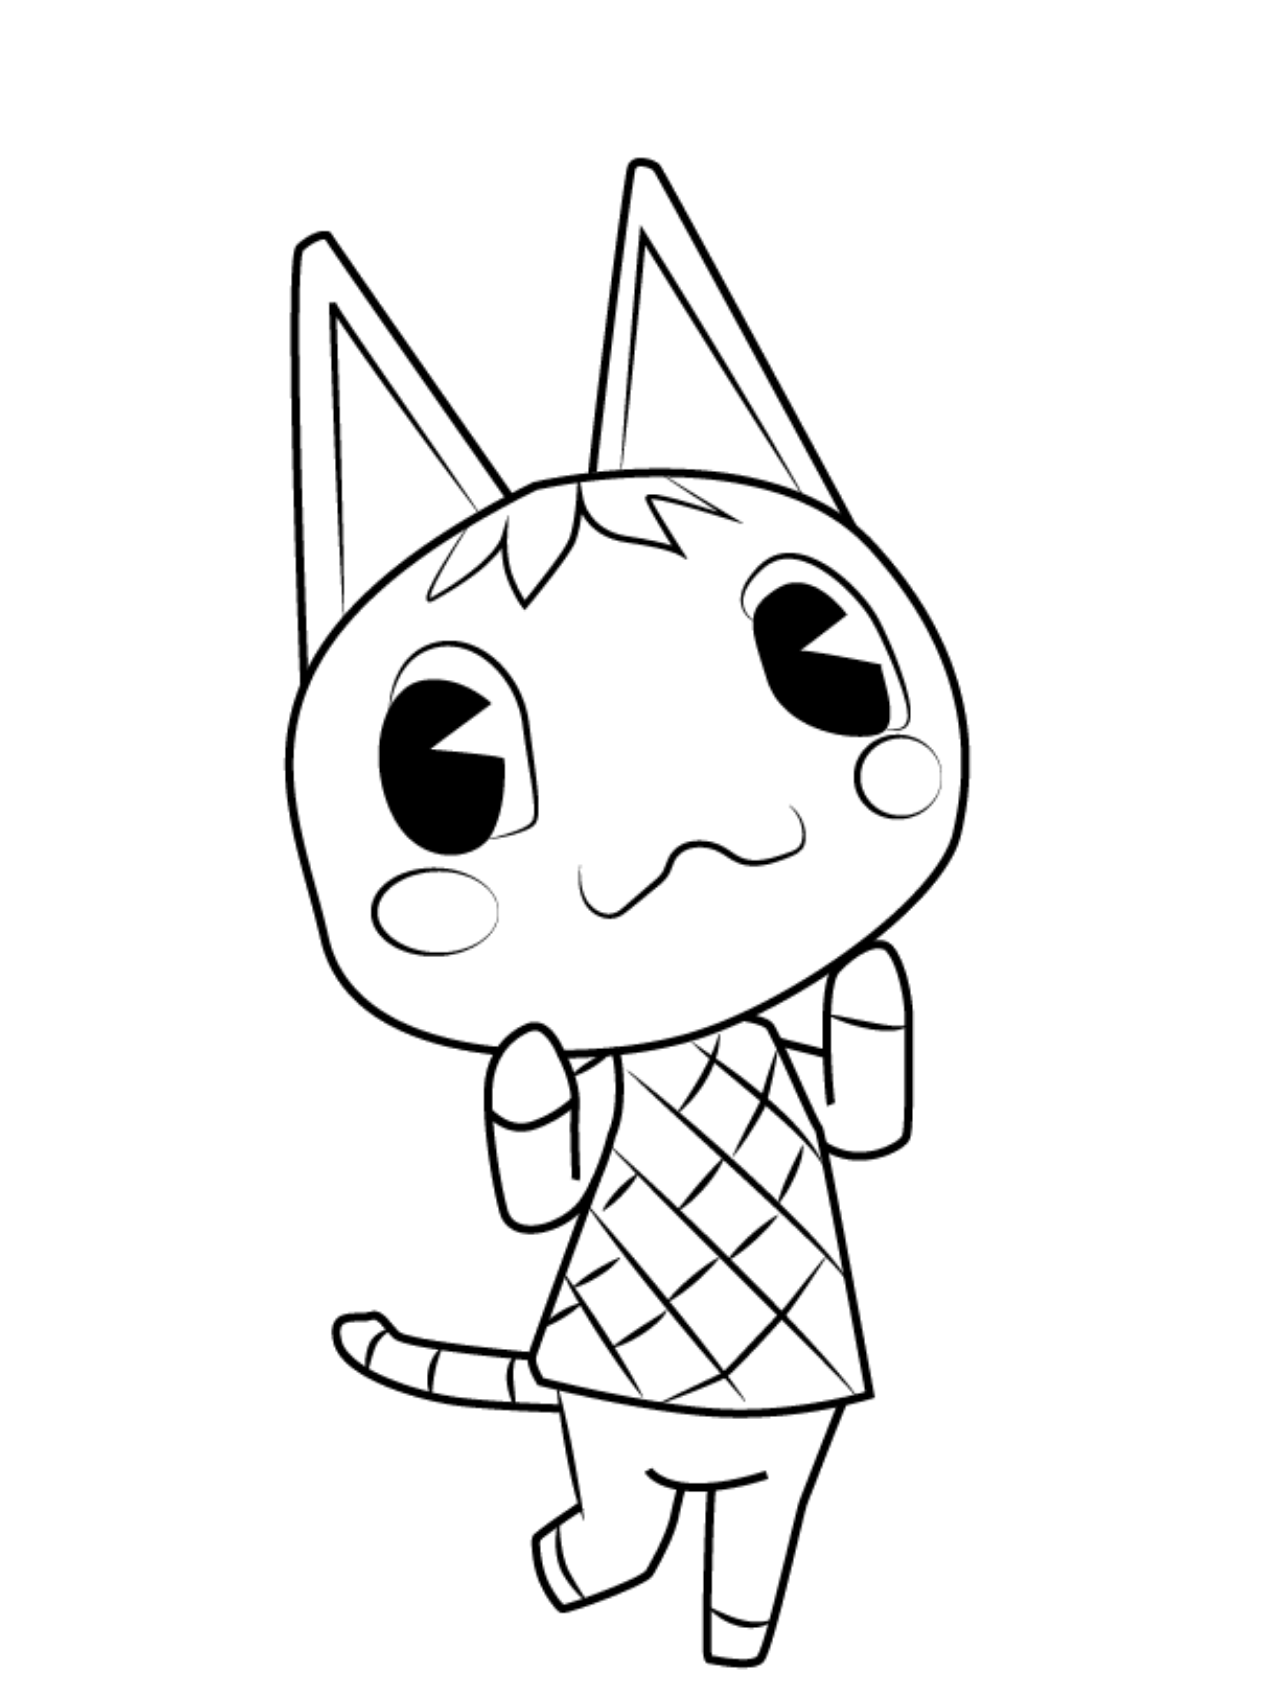 Cute Animal Crossing New Horizons Coloring Pages Pdf - Free Printable Animal Crossing New Horizons Coloring Pages